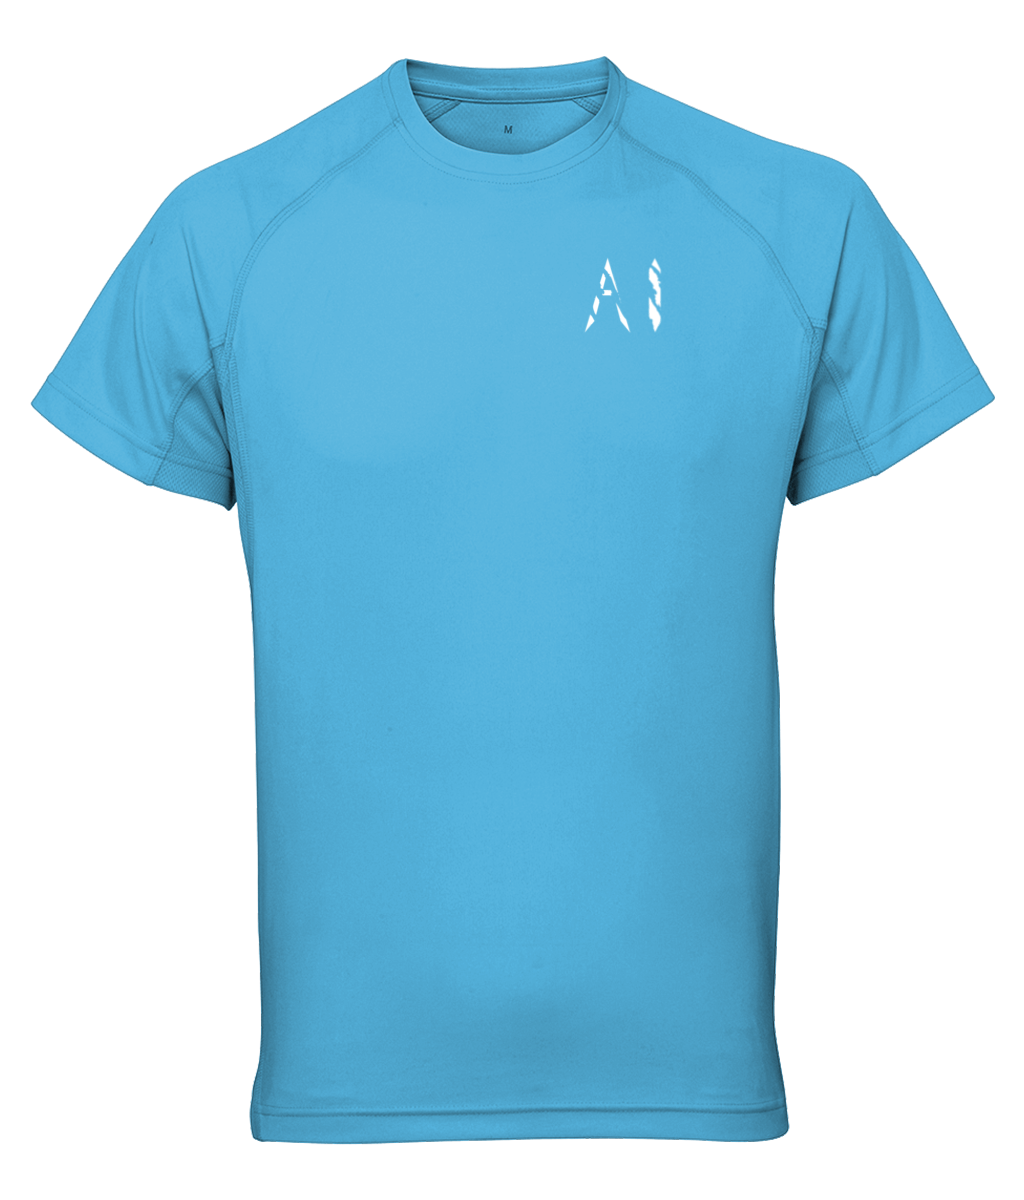 Womens teal blue Athletic Performance Top with White AI logo on left breast